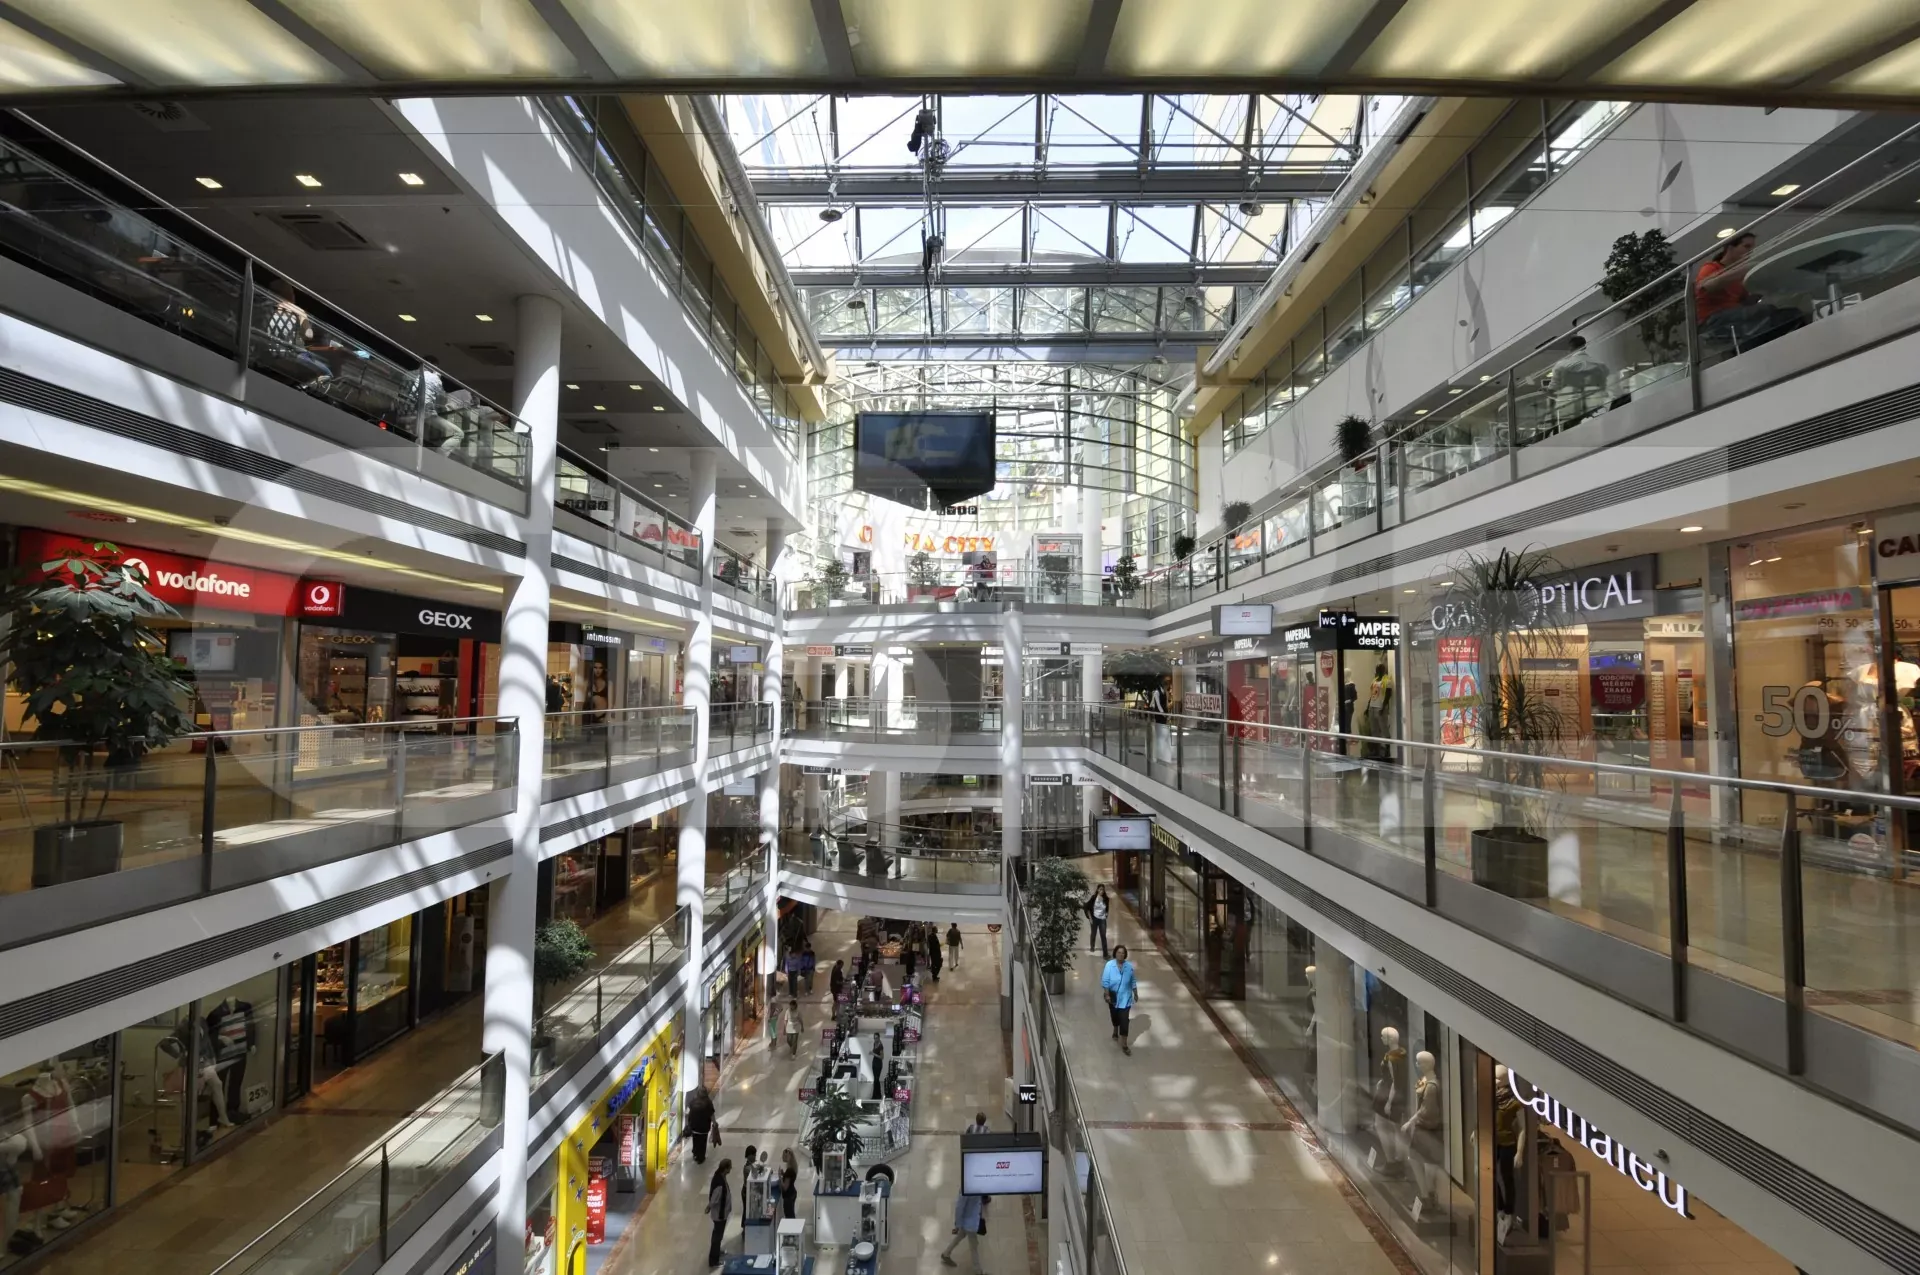 Shopping Center Atrium in Czech Republic, europe | Fragrance,Shoes,Accessories,Clothes,Cosmetics,Sportswear - Country Helper